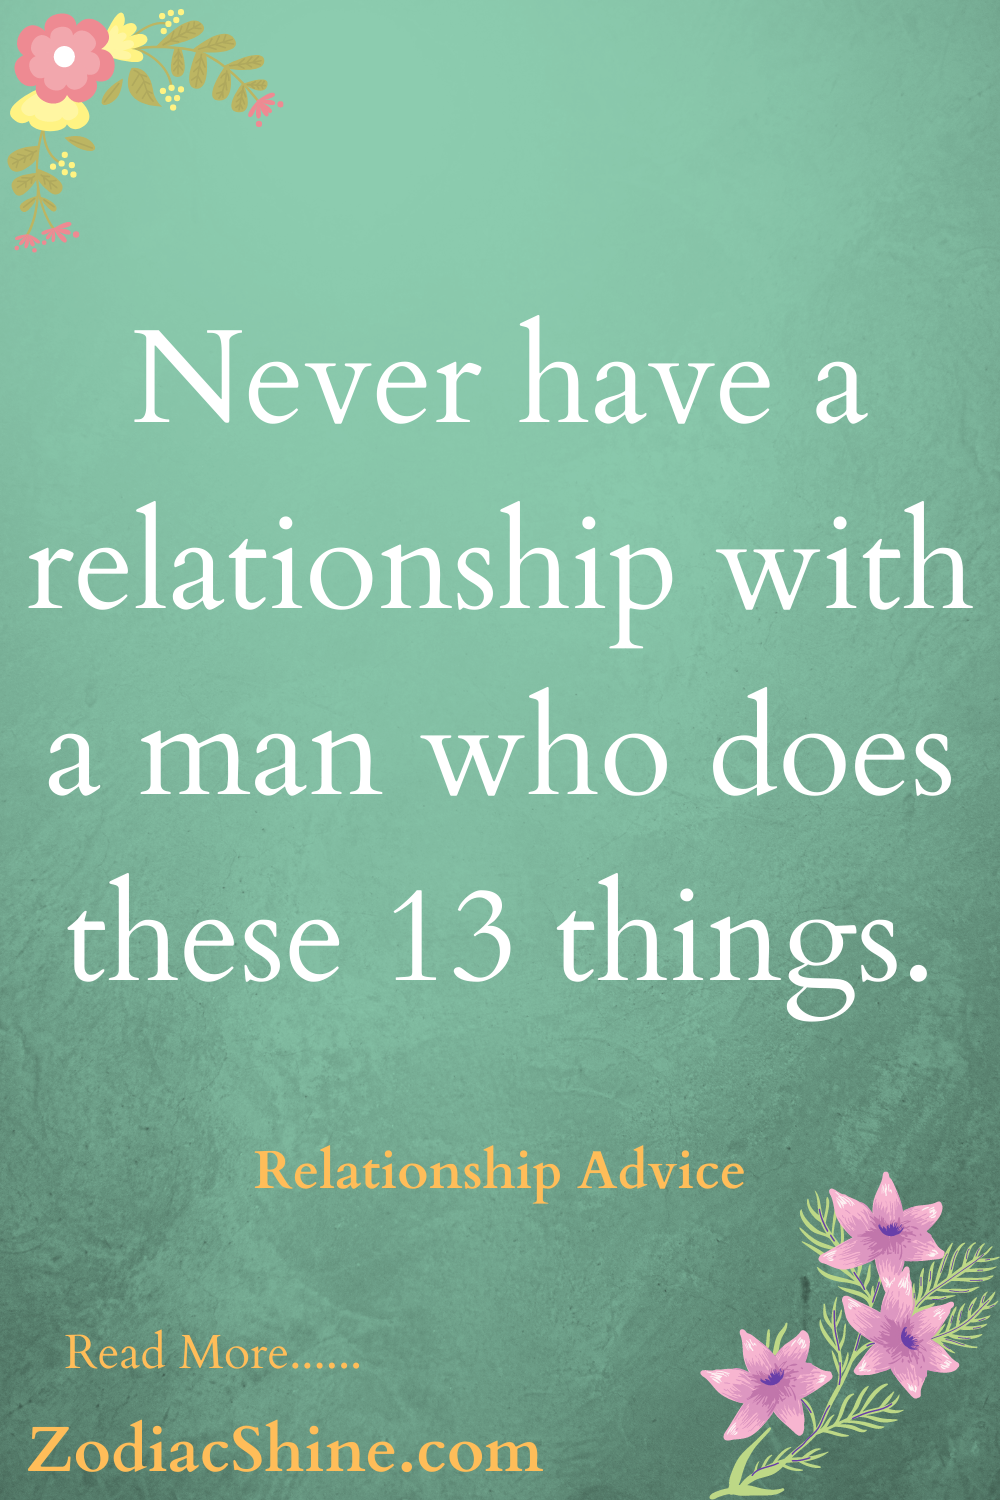 Never have a relationship with a man who does these 13 things.